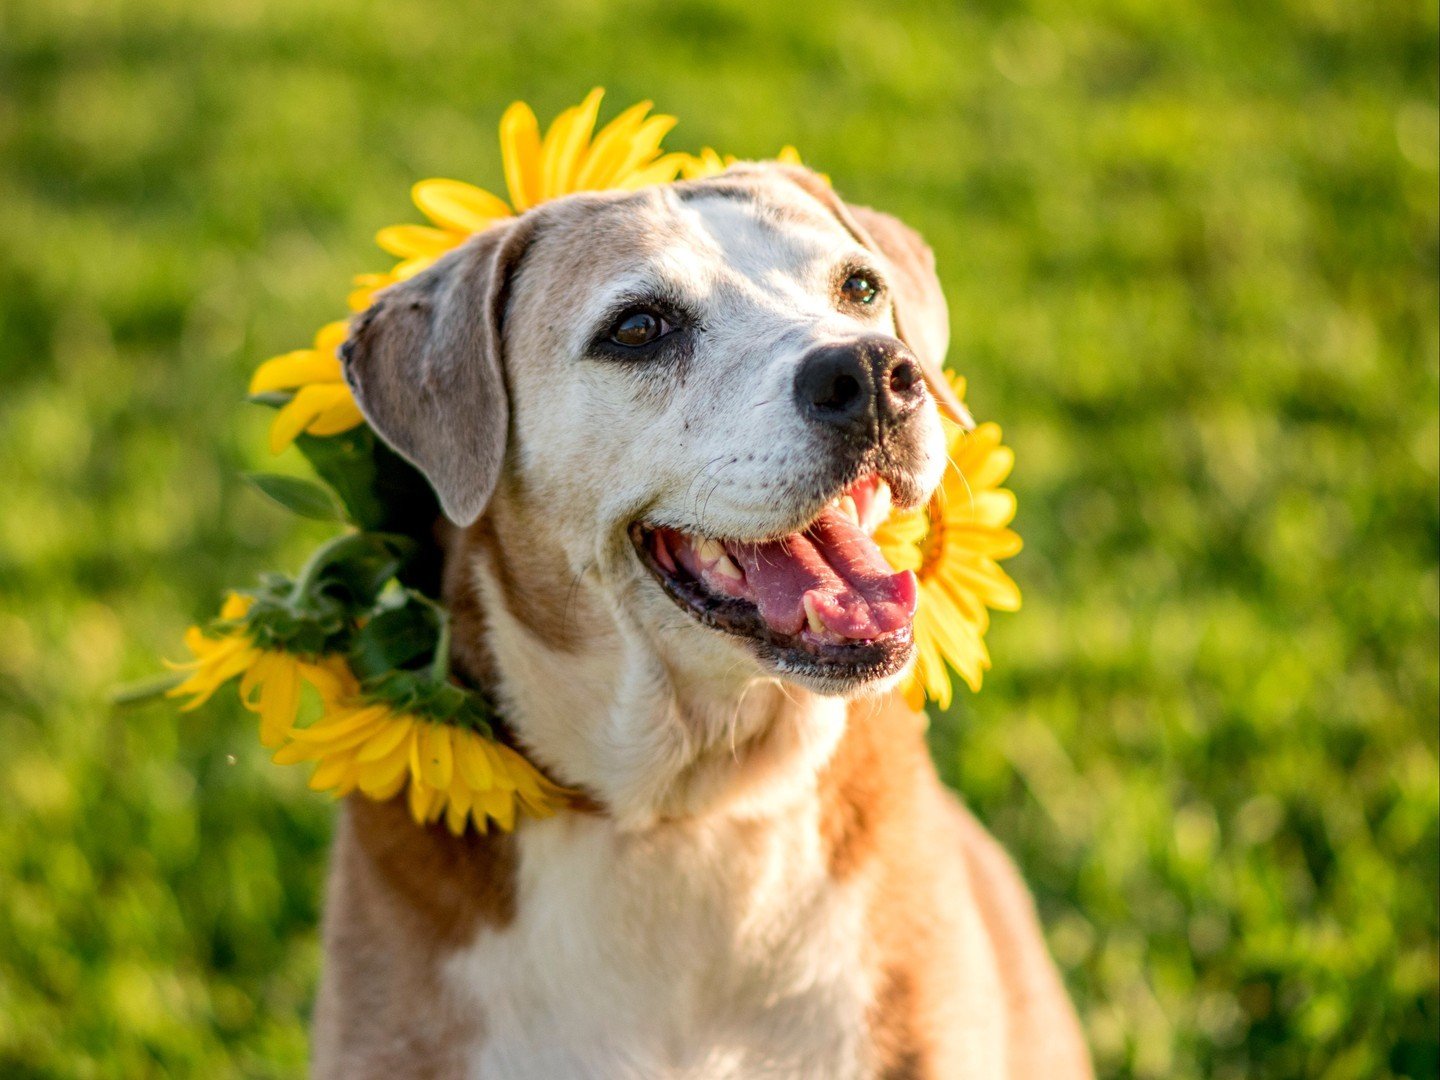 How we feel when those April showers start looking like May flowers 🌻 

#TriumphTogether #TriumphPack #SpringDogs